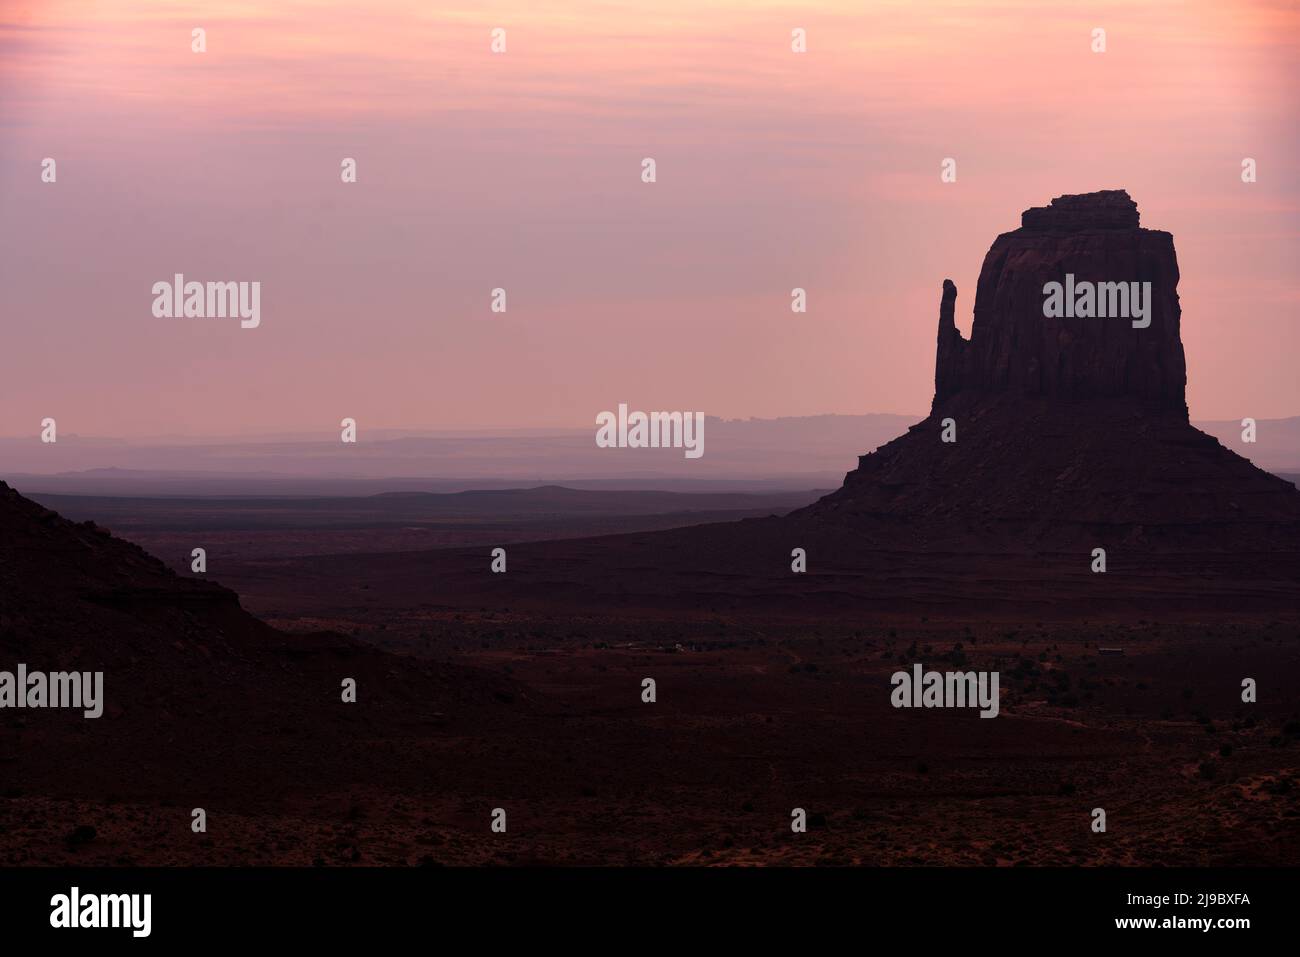 National parks usa southwest area of giant rock formations and table mountains in Monument Valley Stock Photo